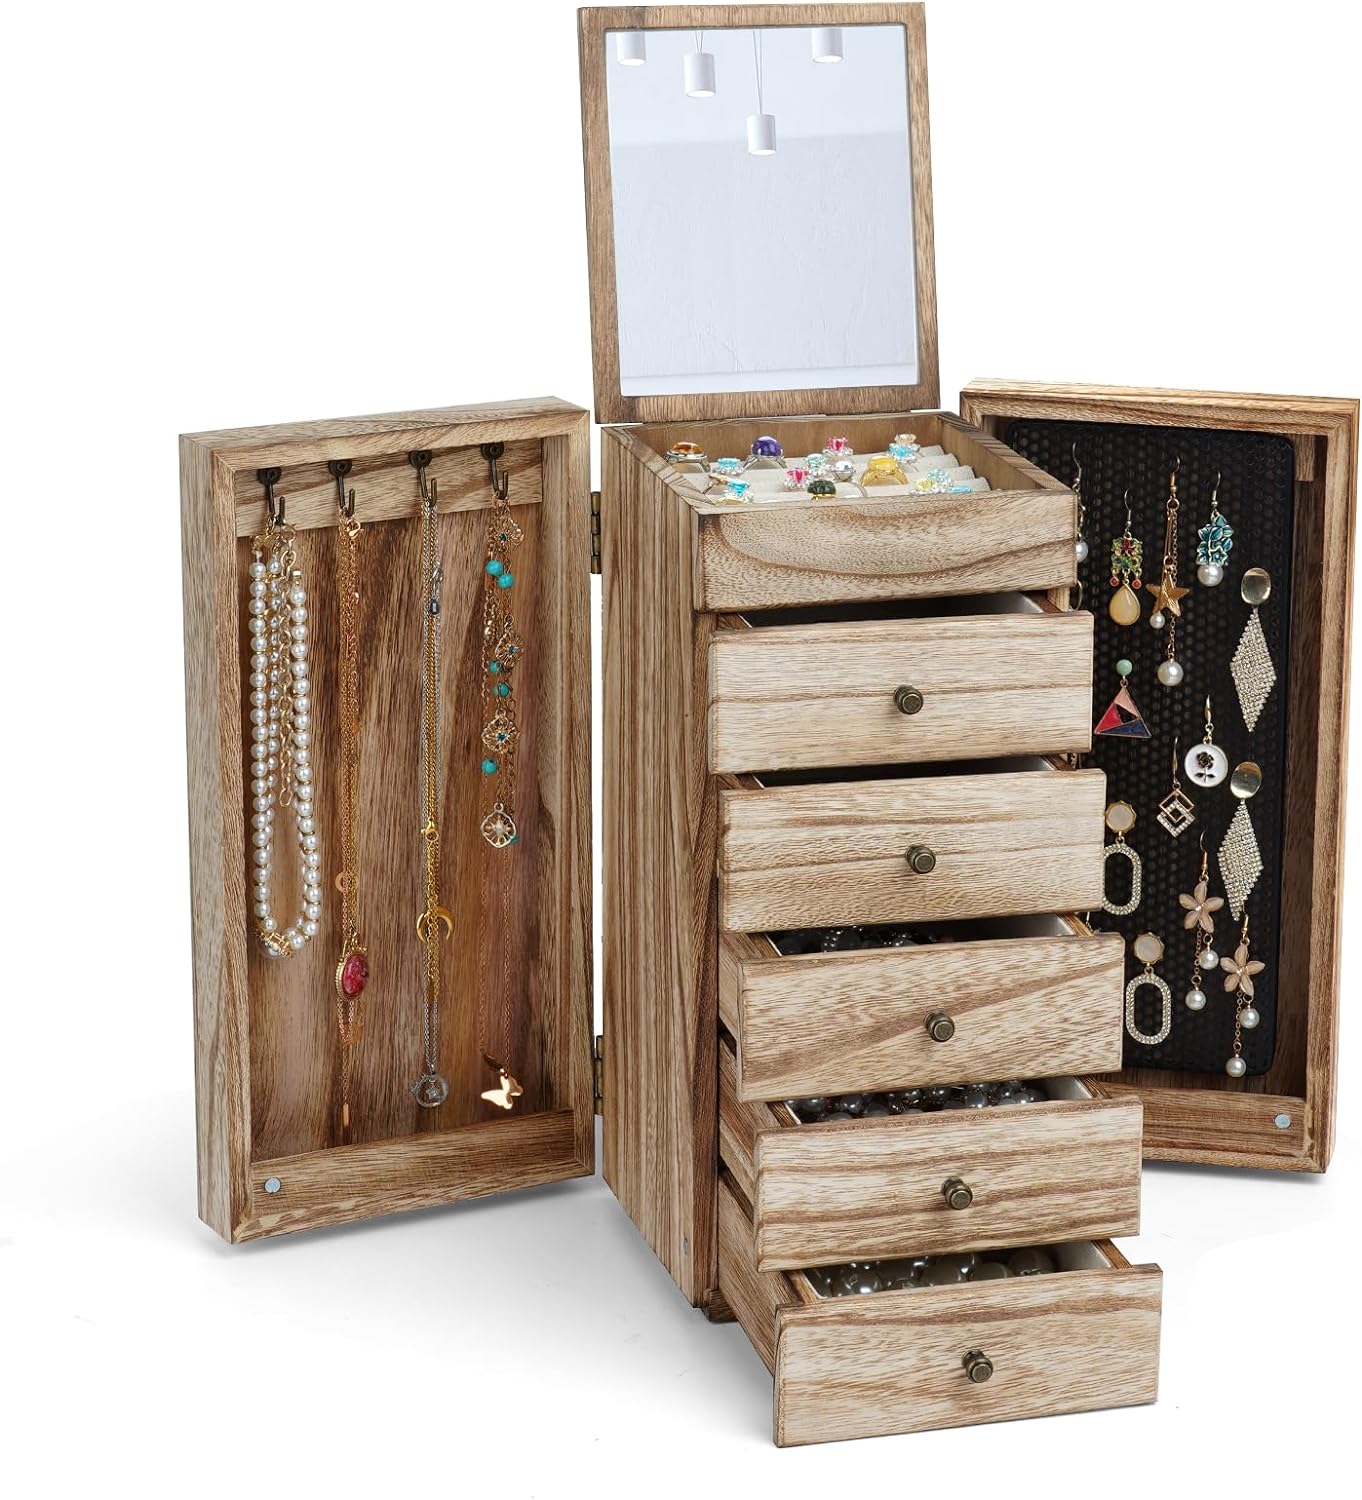 Meangood Jewelry Box Wood for Women, 6-Layer Large Organizer Box with Mirror  5 Drawers for Rings, Earrings, Necklaces, Vintage Style Carbonized Black